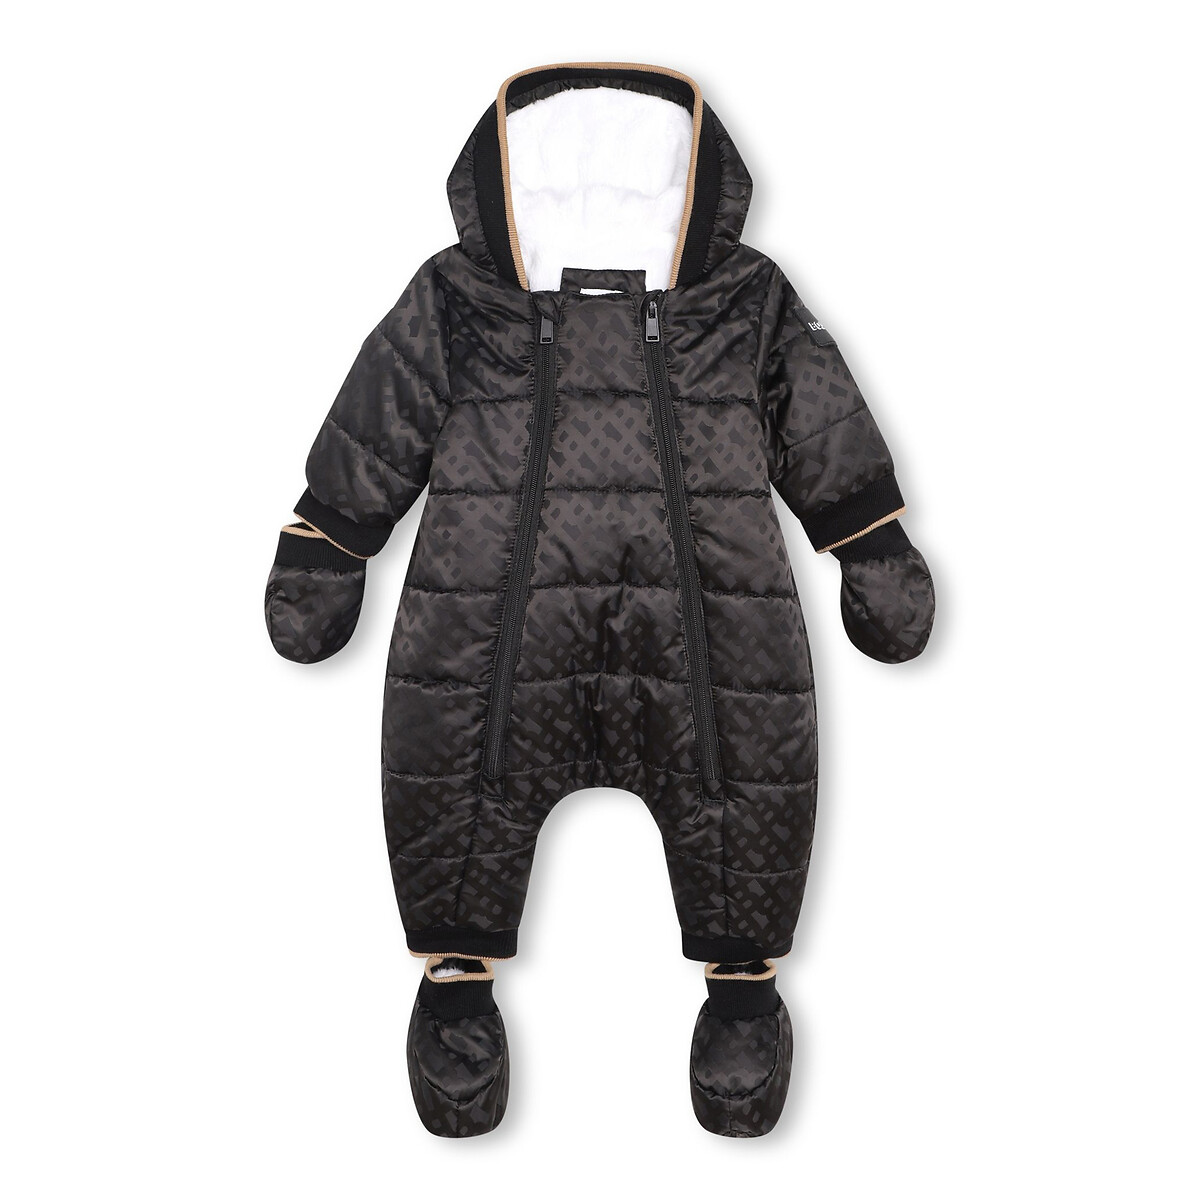 Baby’s Quilted Hooded Pramsuit